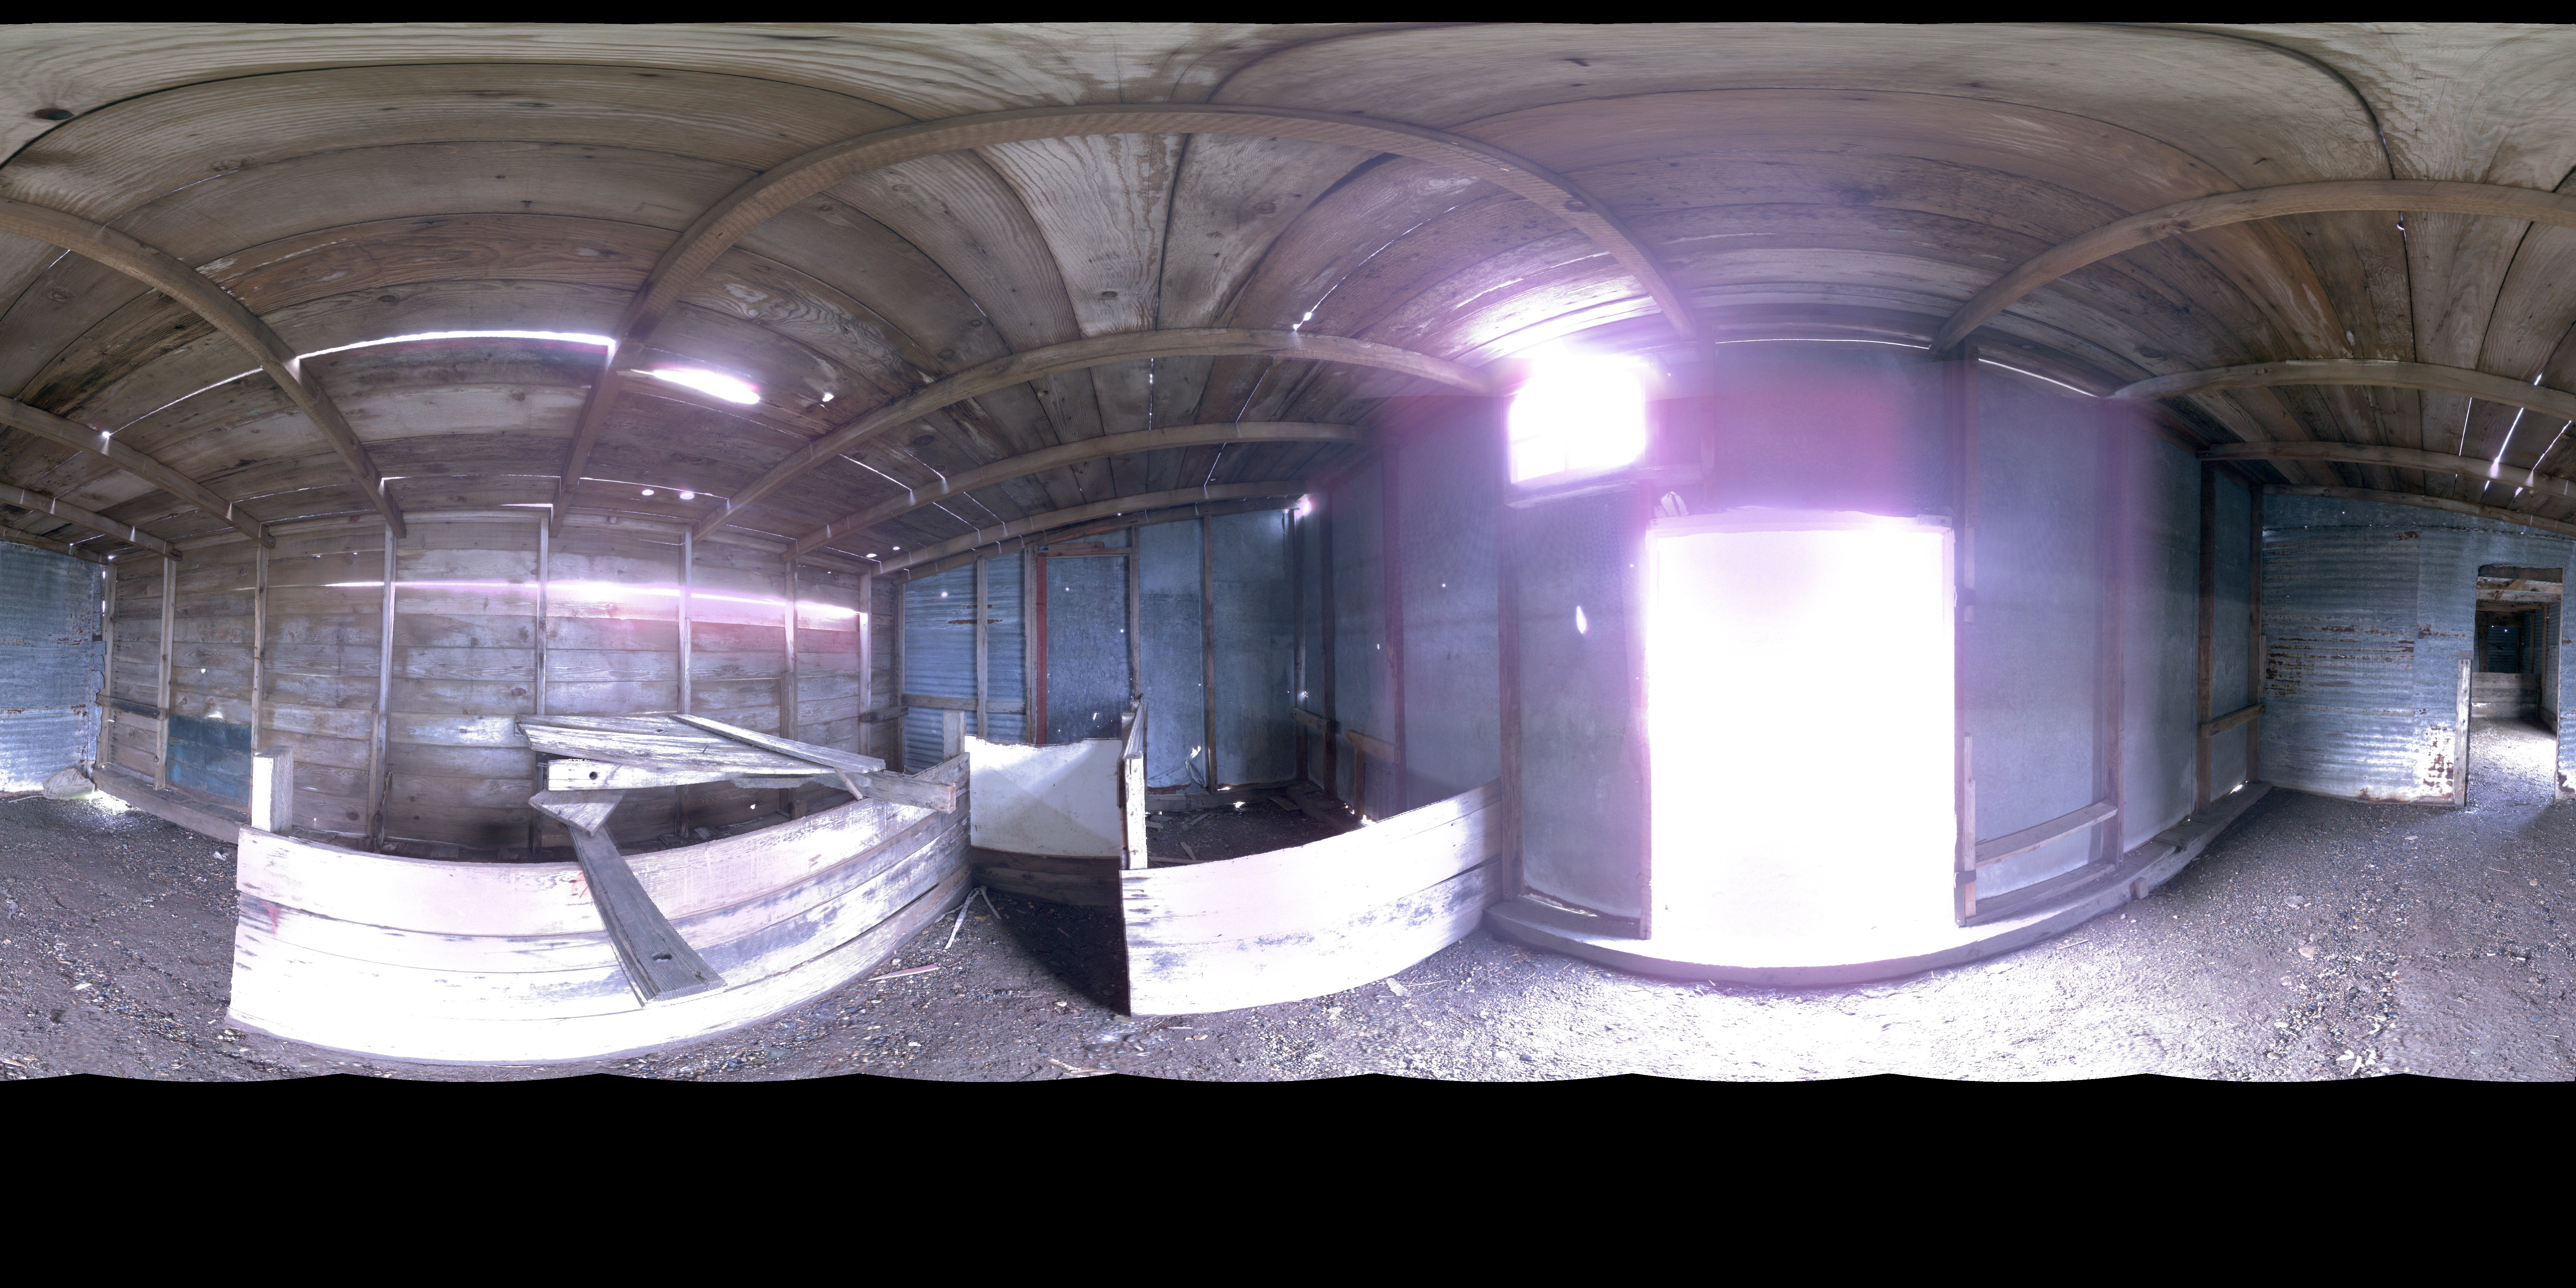 Panoramic view of the RCMP Dog Kennels and Run from the Leica BKL 360, scanning location 1.